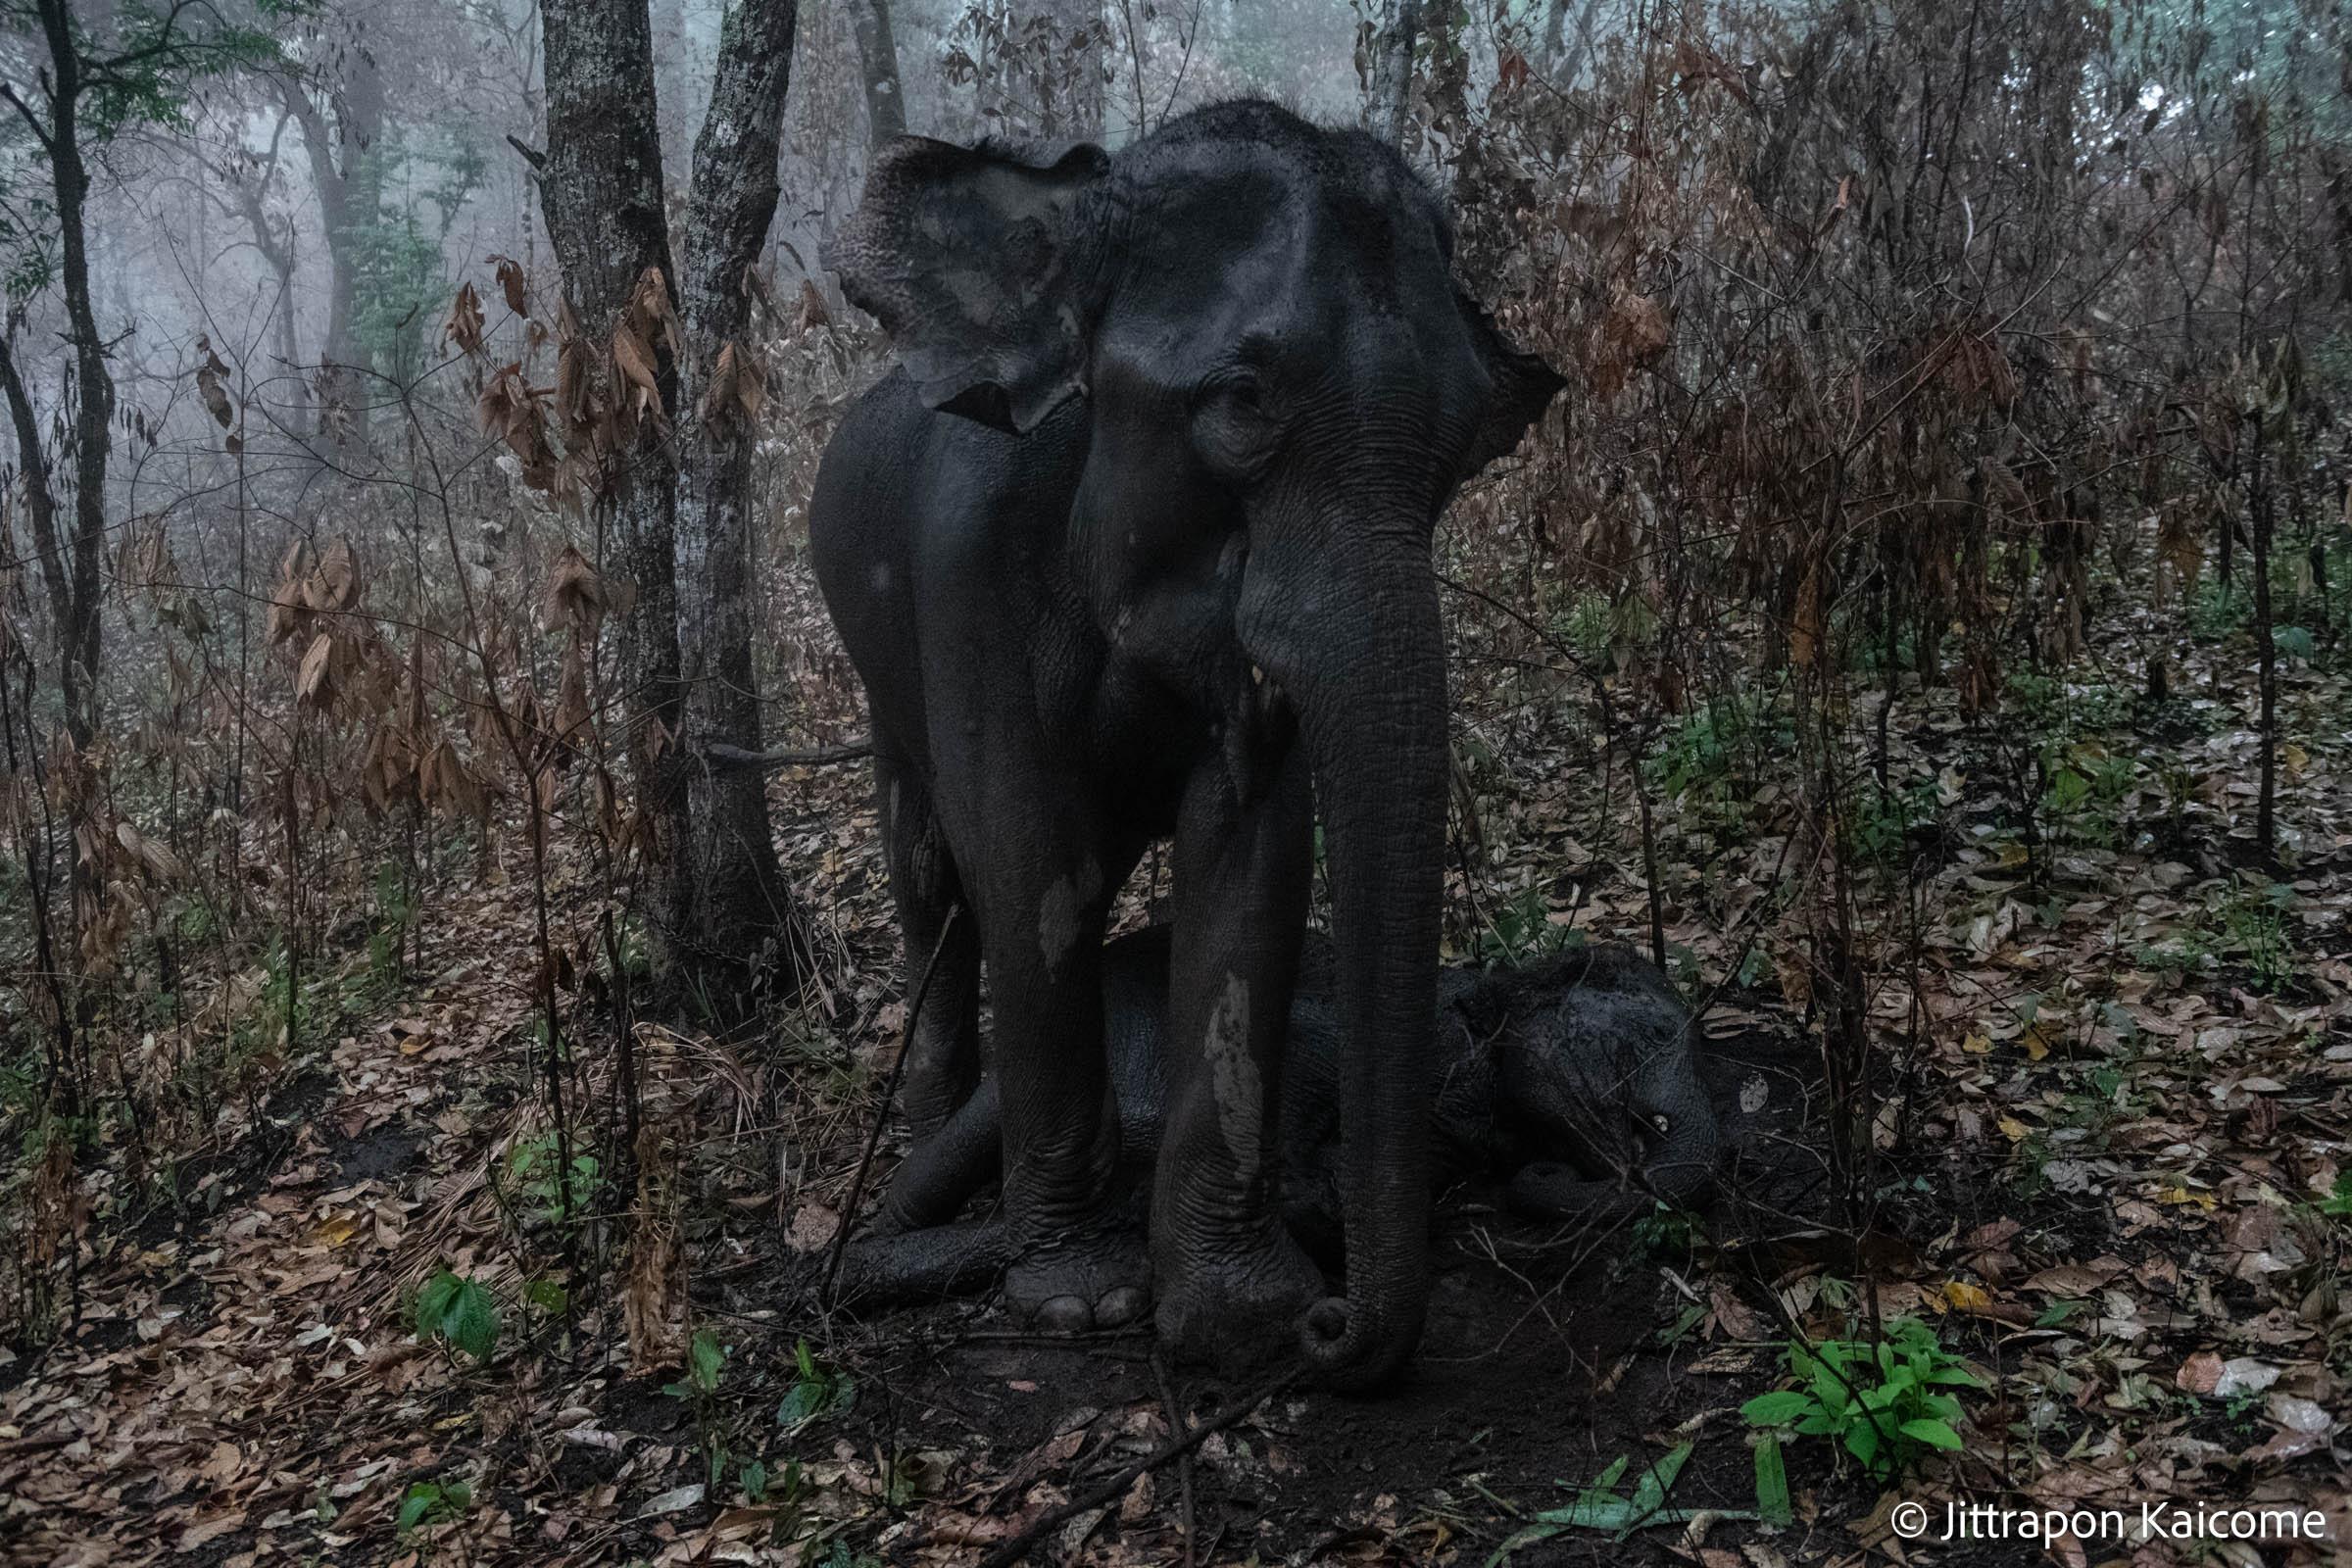 An Inseparable Bond - The baby elephant slept beneath its mother. They were...